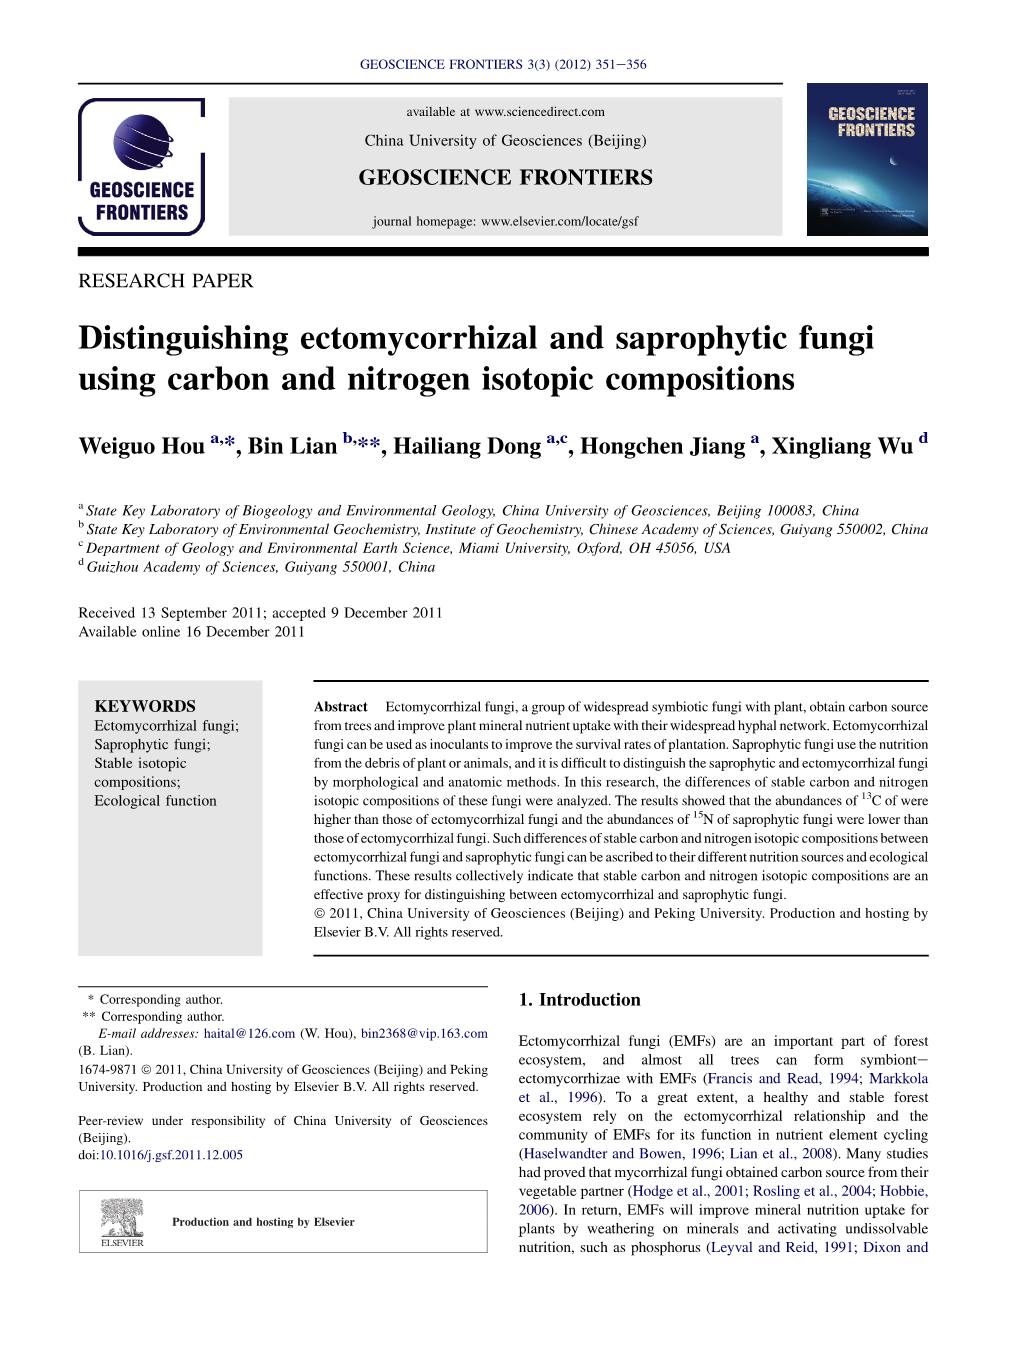 Distinguishing Ectomycorrhizal and Saprophytic Fungi Using Carbon and Nitrogen Isotopic Compositions